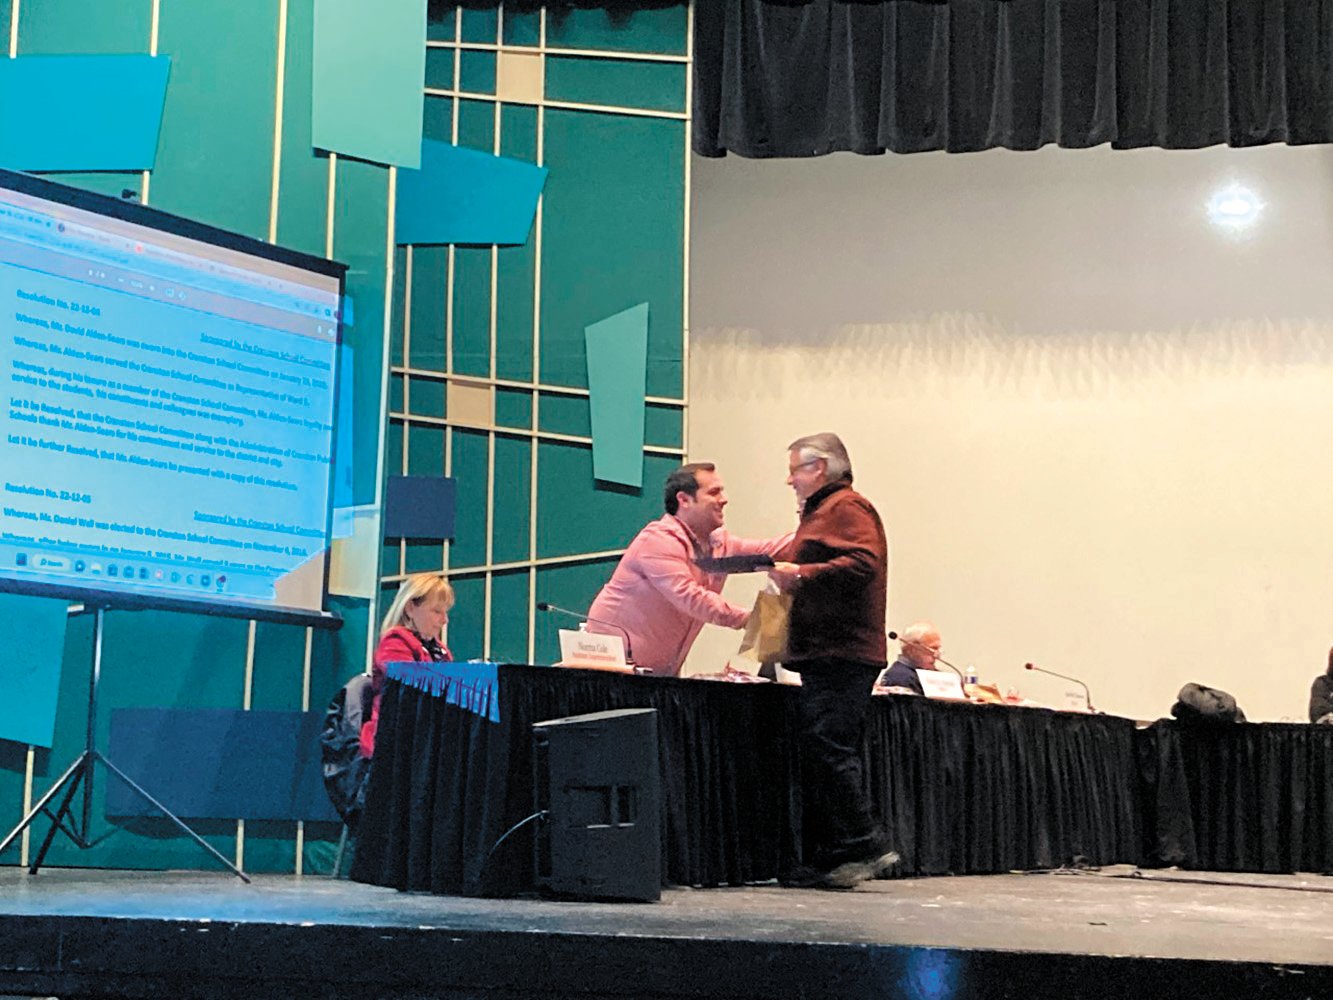 WELL DESERVED RECOGNITION: Domenic Fusco hands David Alden Sears a copy of his resolution and a gift bag for his time spent on the School Committee.